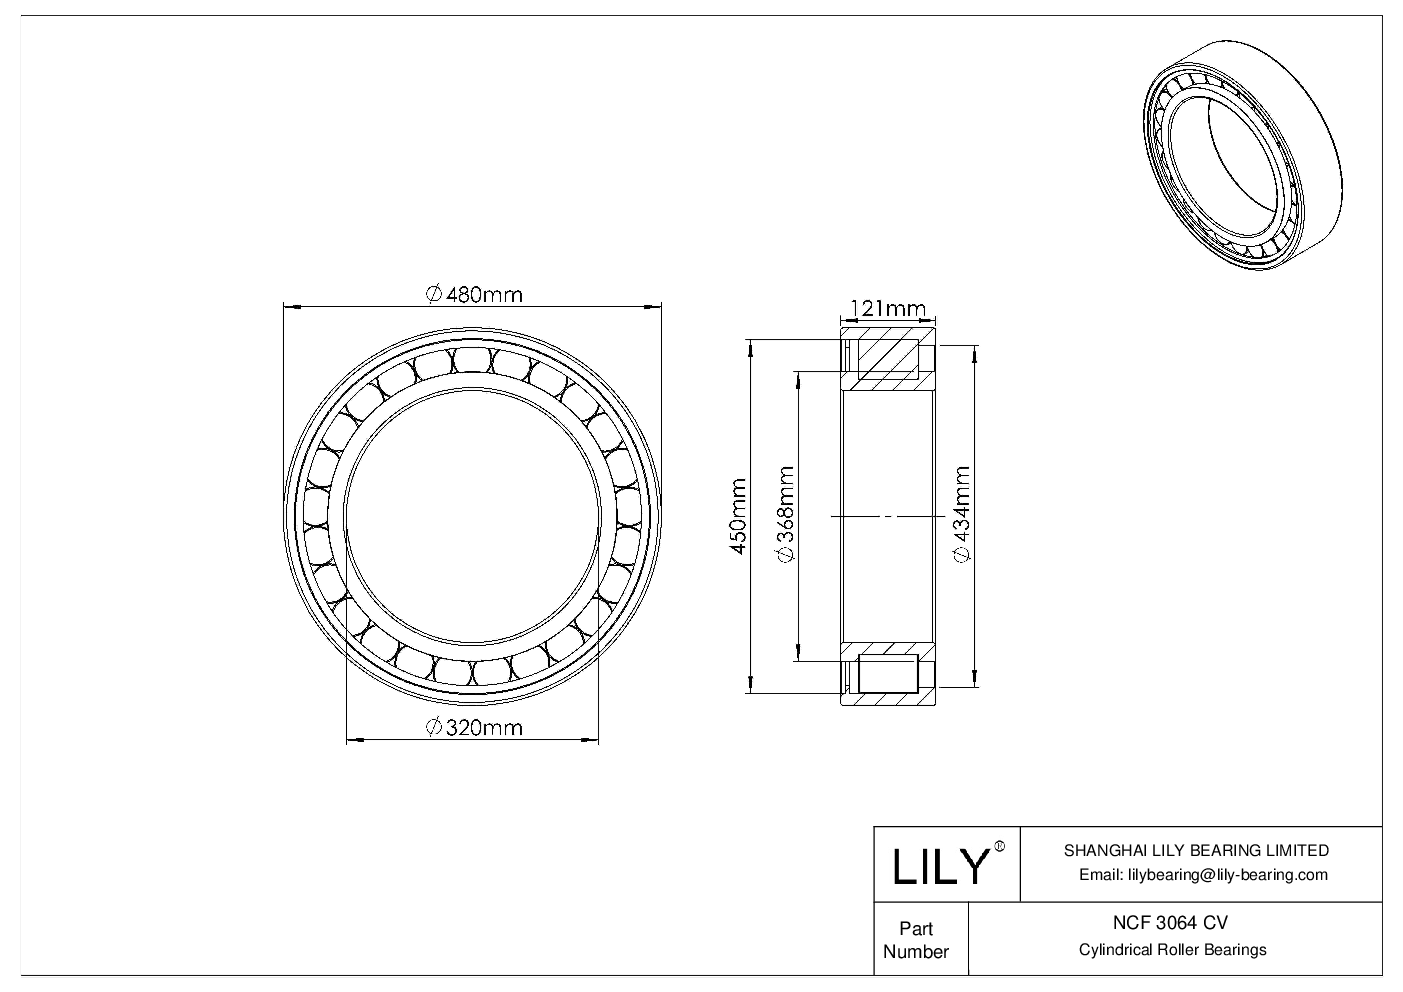 NCF 3064 CV Single Row Full Complement Cylindrical Roller Bearings cad drawing